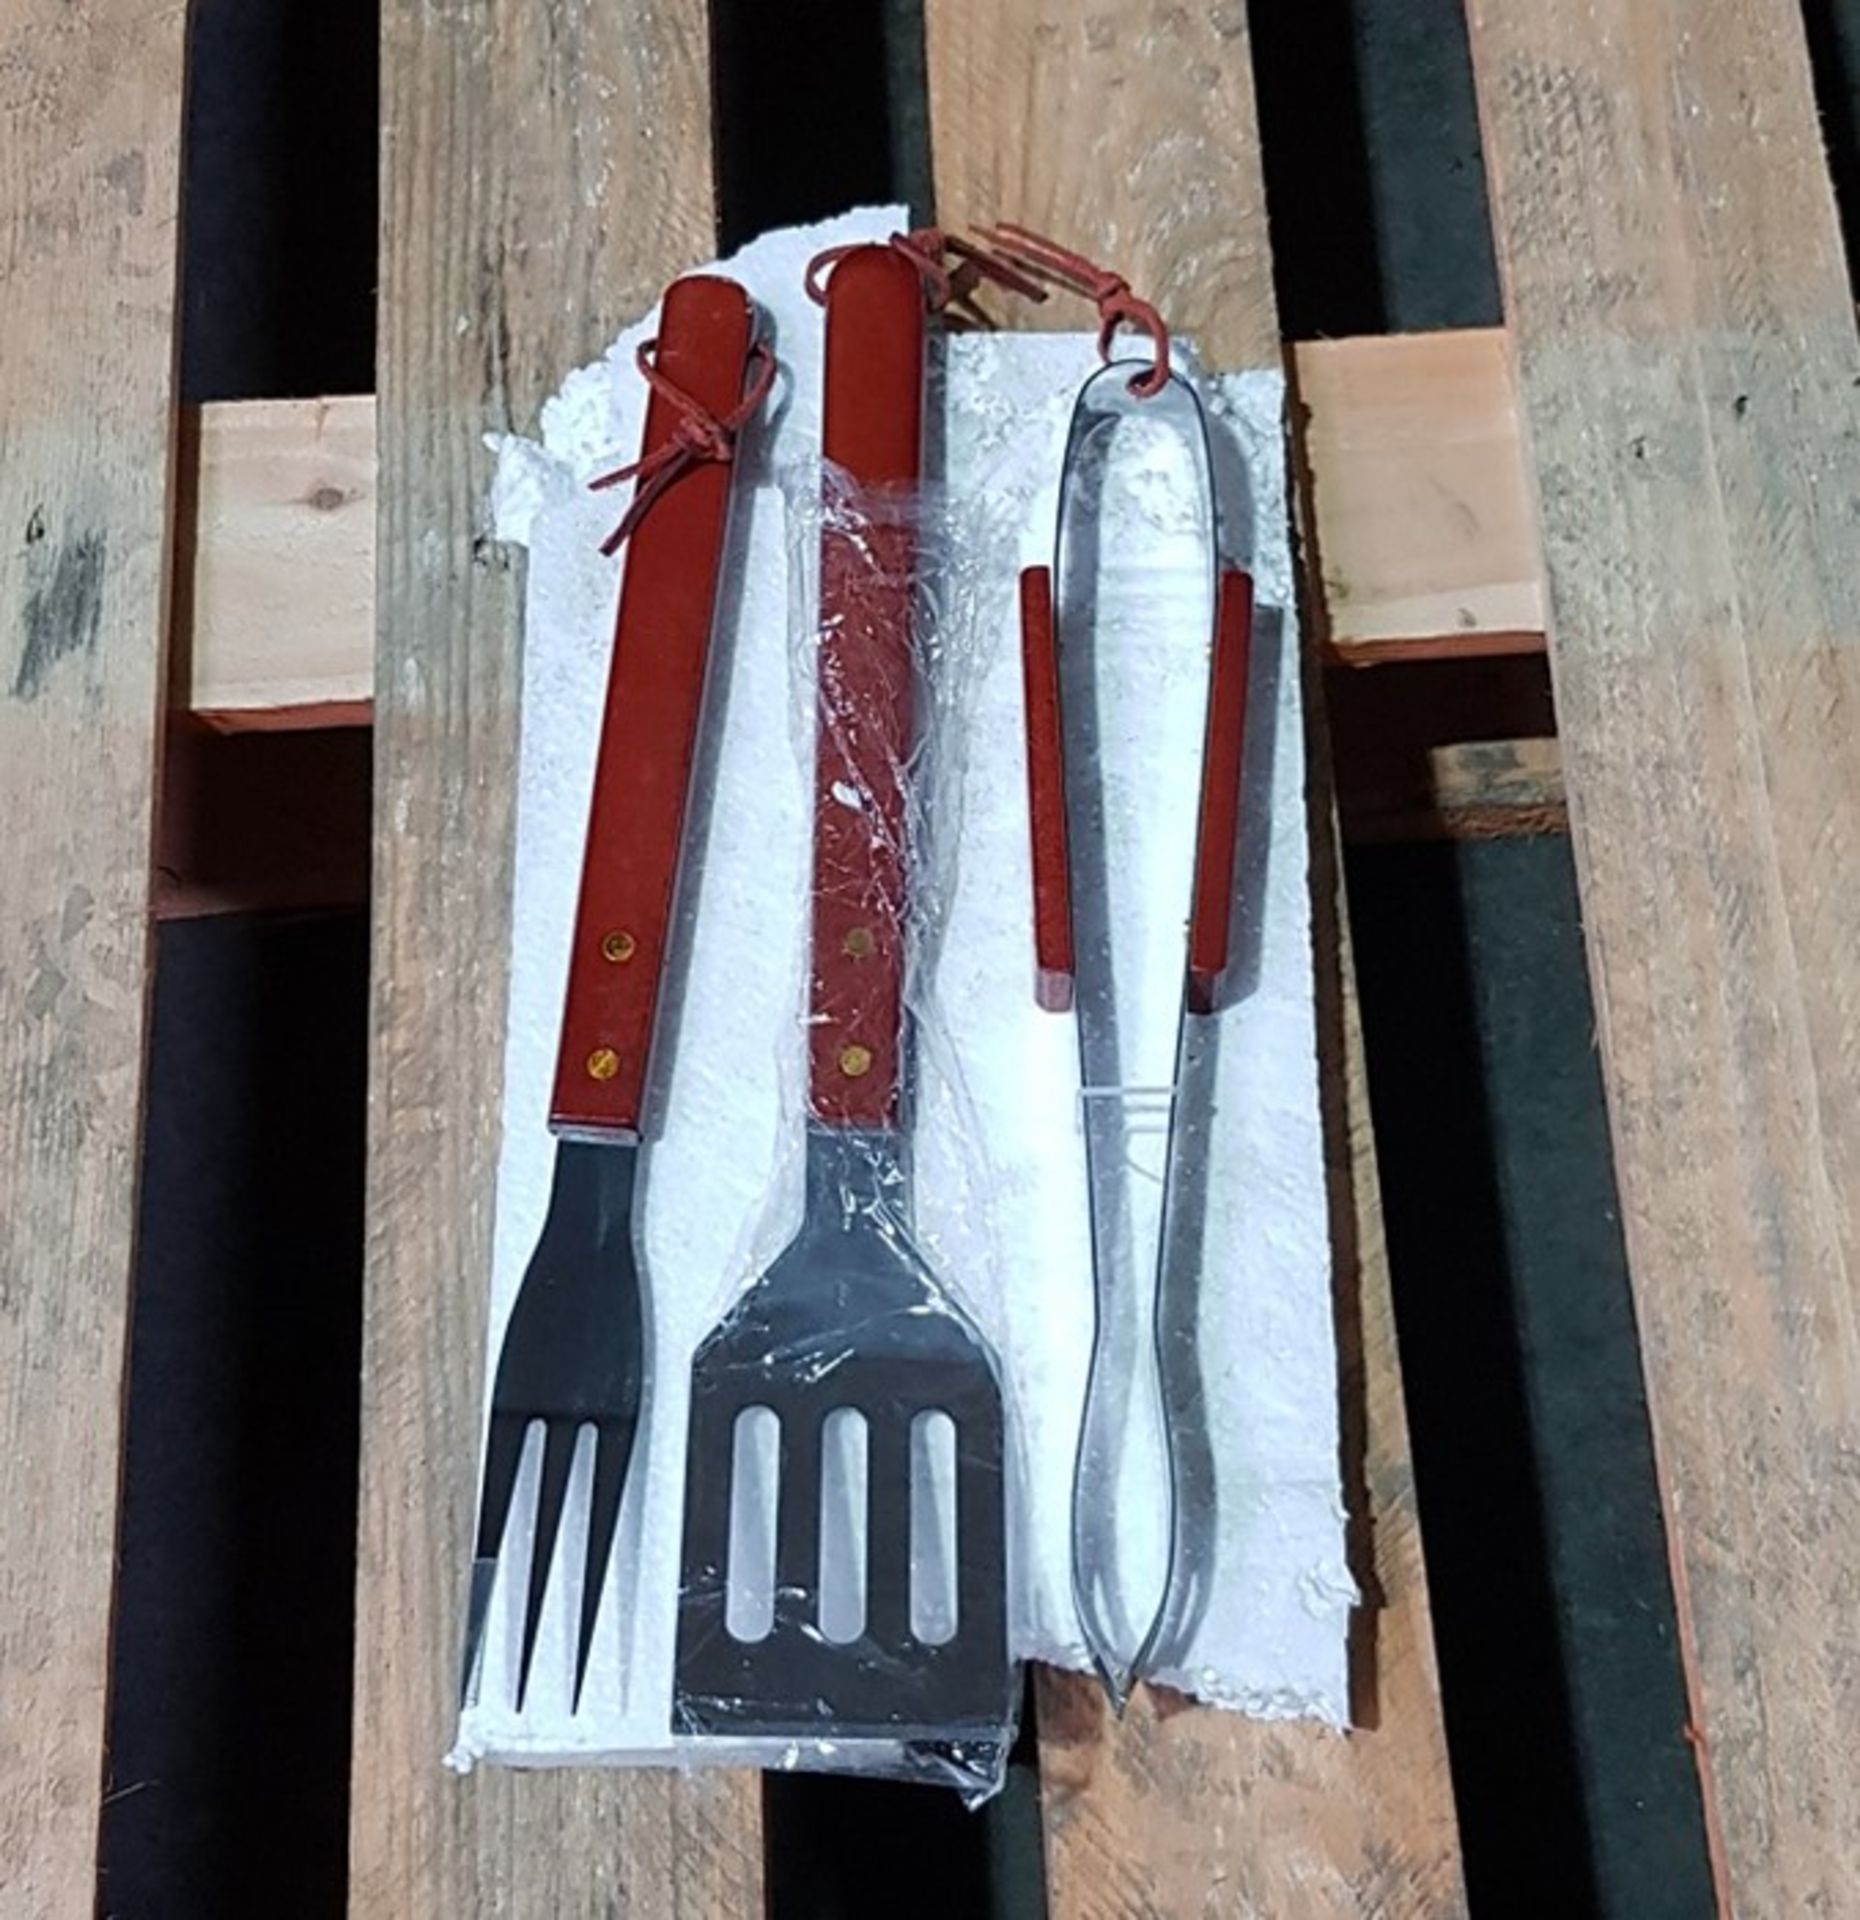 1 LOT TO CONTAIN GRADE B LA REDOUTE BBQ UTENSIL SET / QTY - 3 PIECES / RRP £29.99 (VIEWING HIGHLY - Image 2 of 2